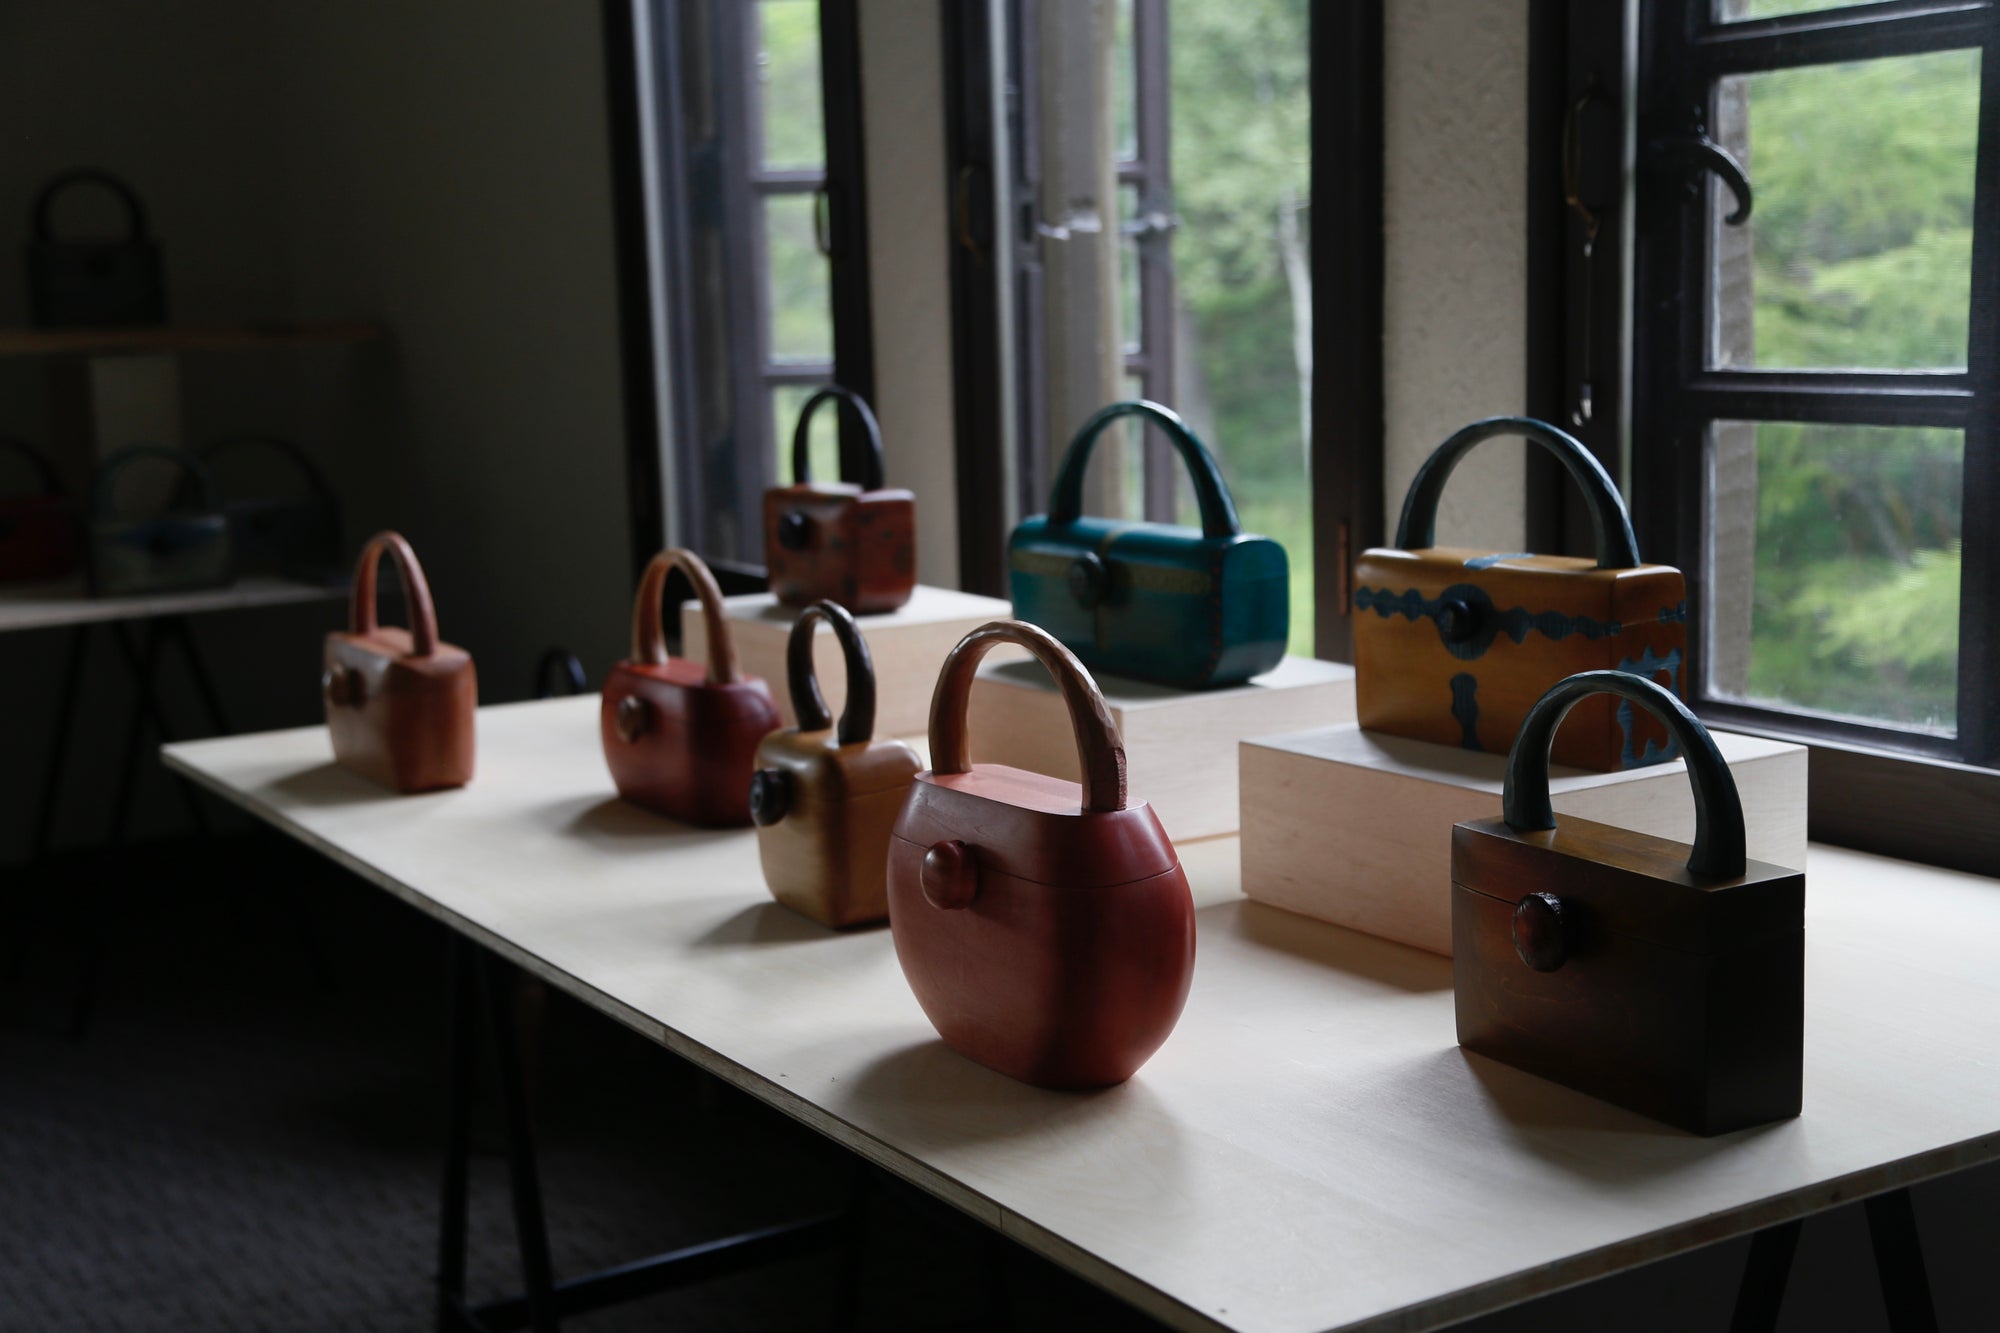 Wooden Bags lined up on the desk